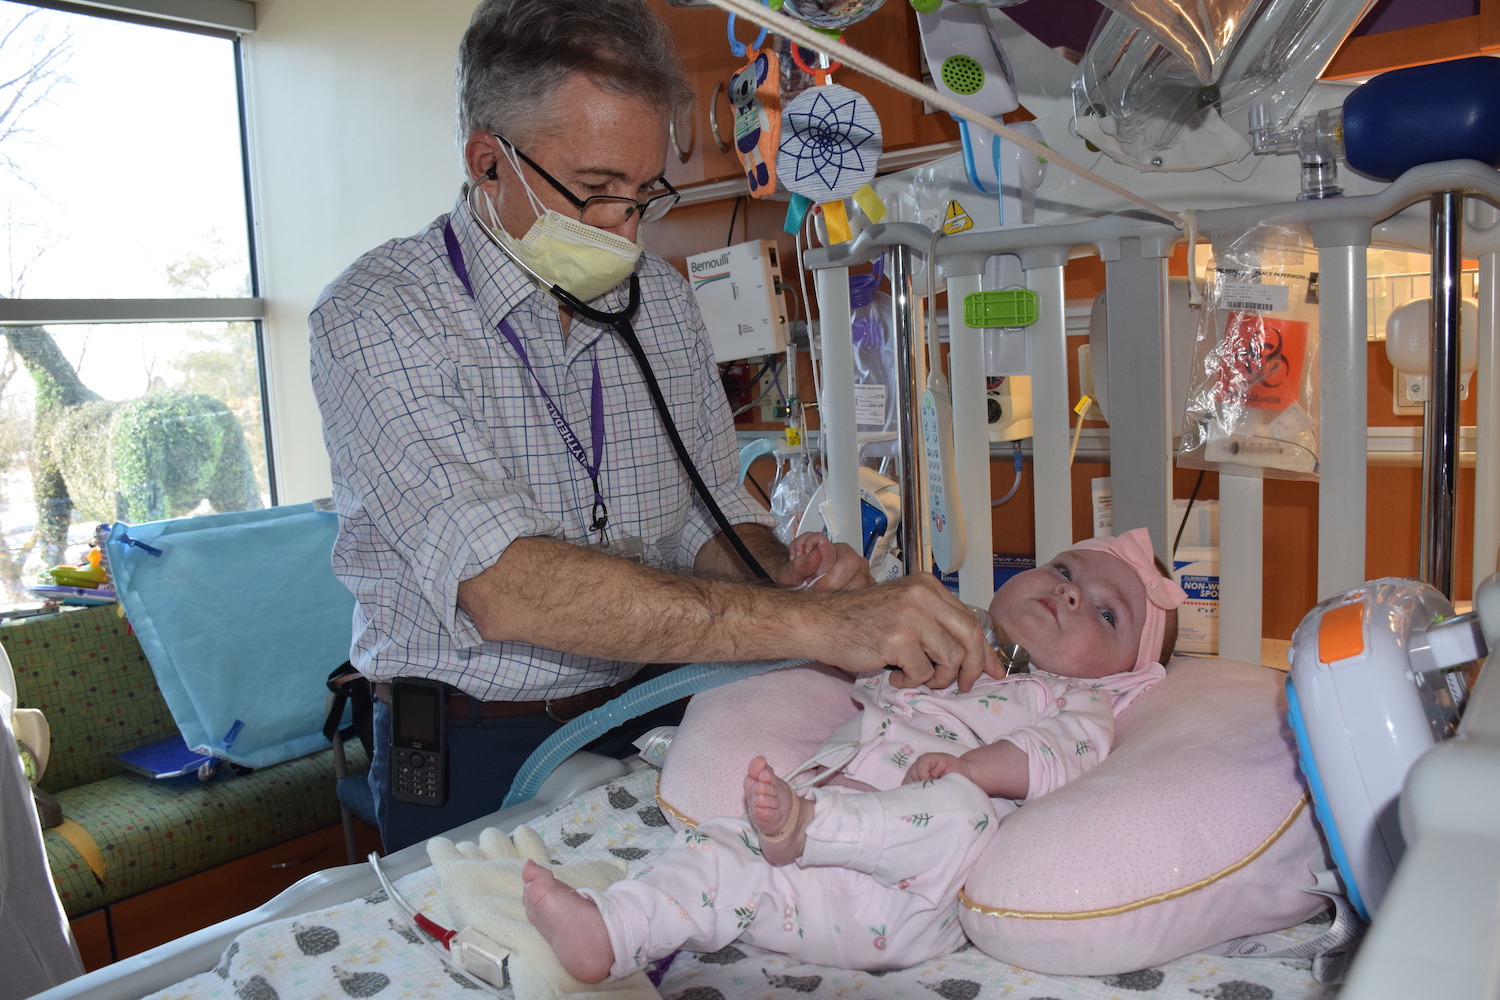 Preemie Twin Who Lost Her Brother at Birth Survives, Heads Home After 408 Days in Hospital